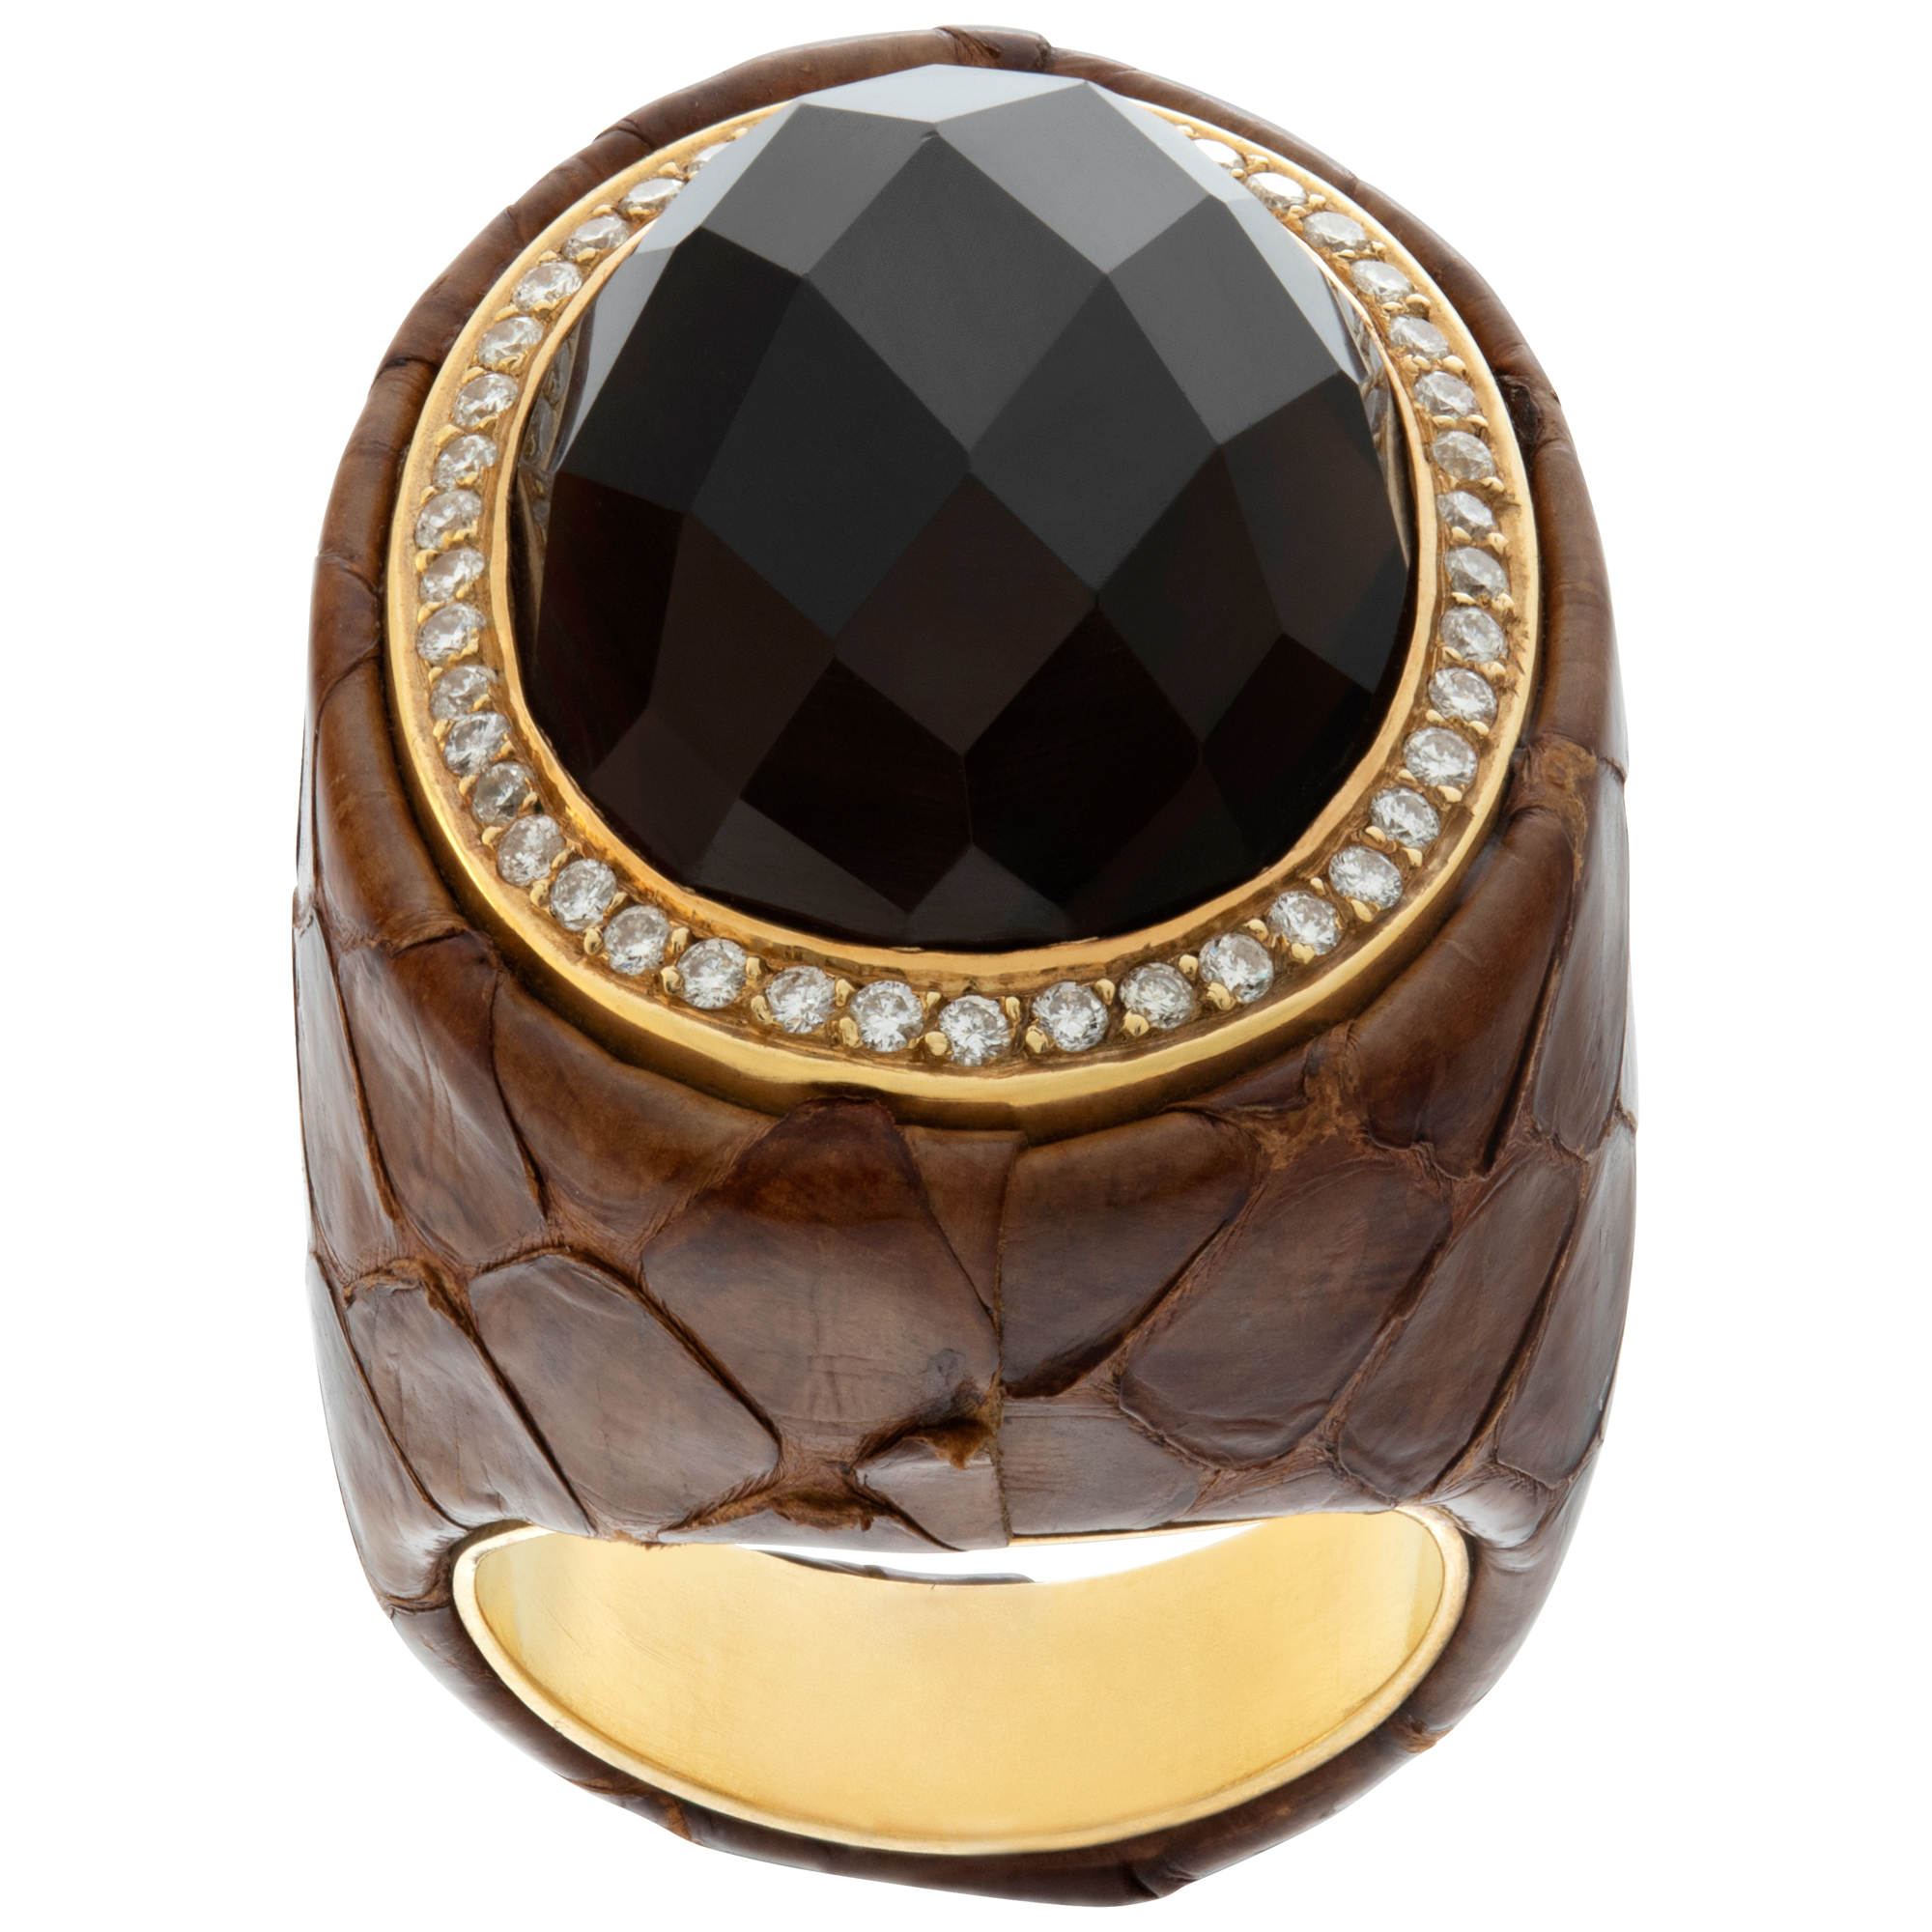 Unique brown leather diamond and topaz ring set in 18k yellow gold